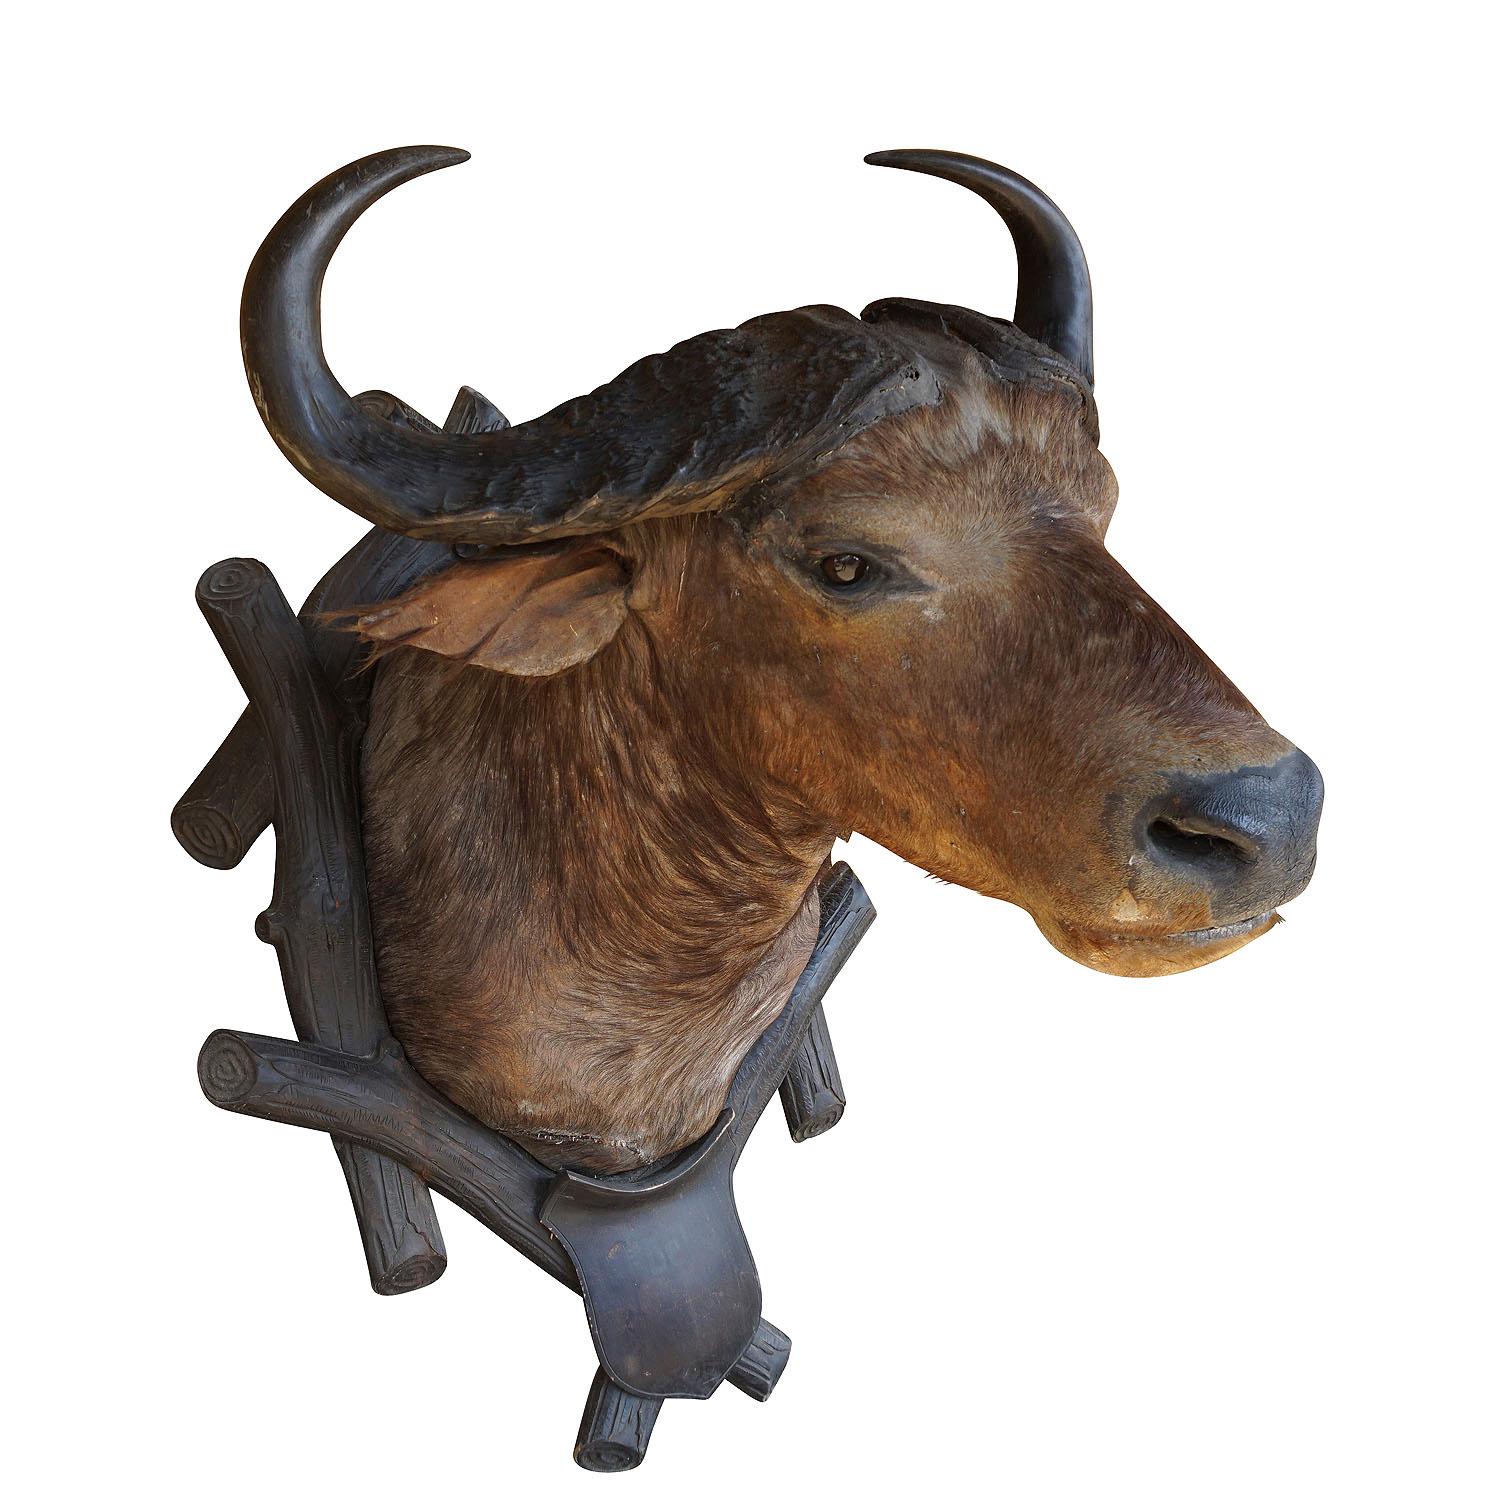 Large Antique Taxidermy of a Water Buffalo, Austria ca. 1900

A very large stuffed African water buffalo (Bubalus arnee) from a noble estate in Austria. It has great horns and is mounted on a hand-carved wooden plaque, early 20th century, good